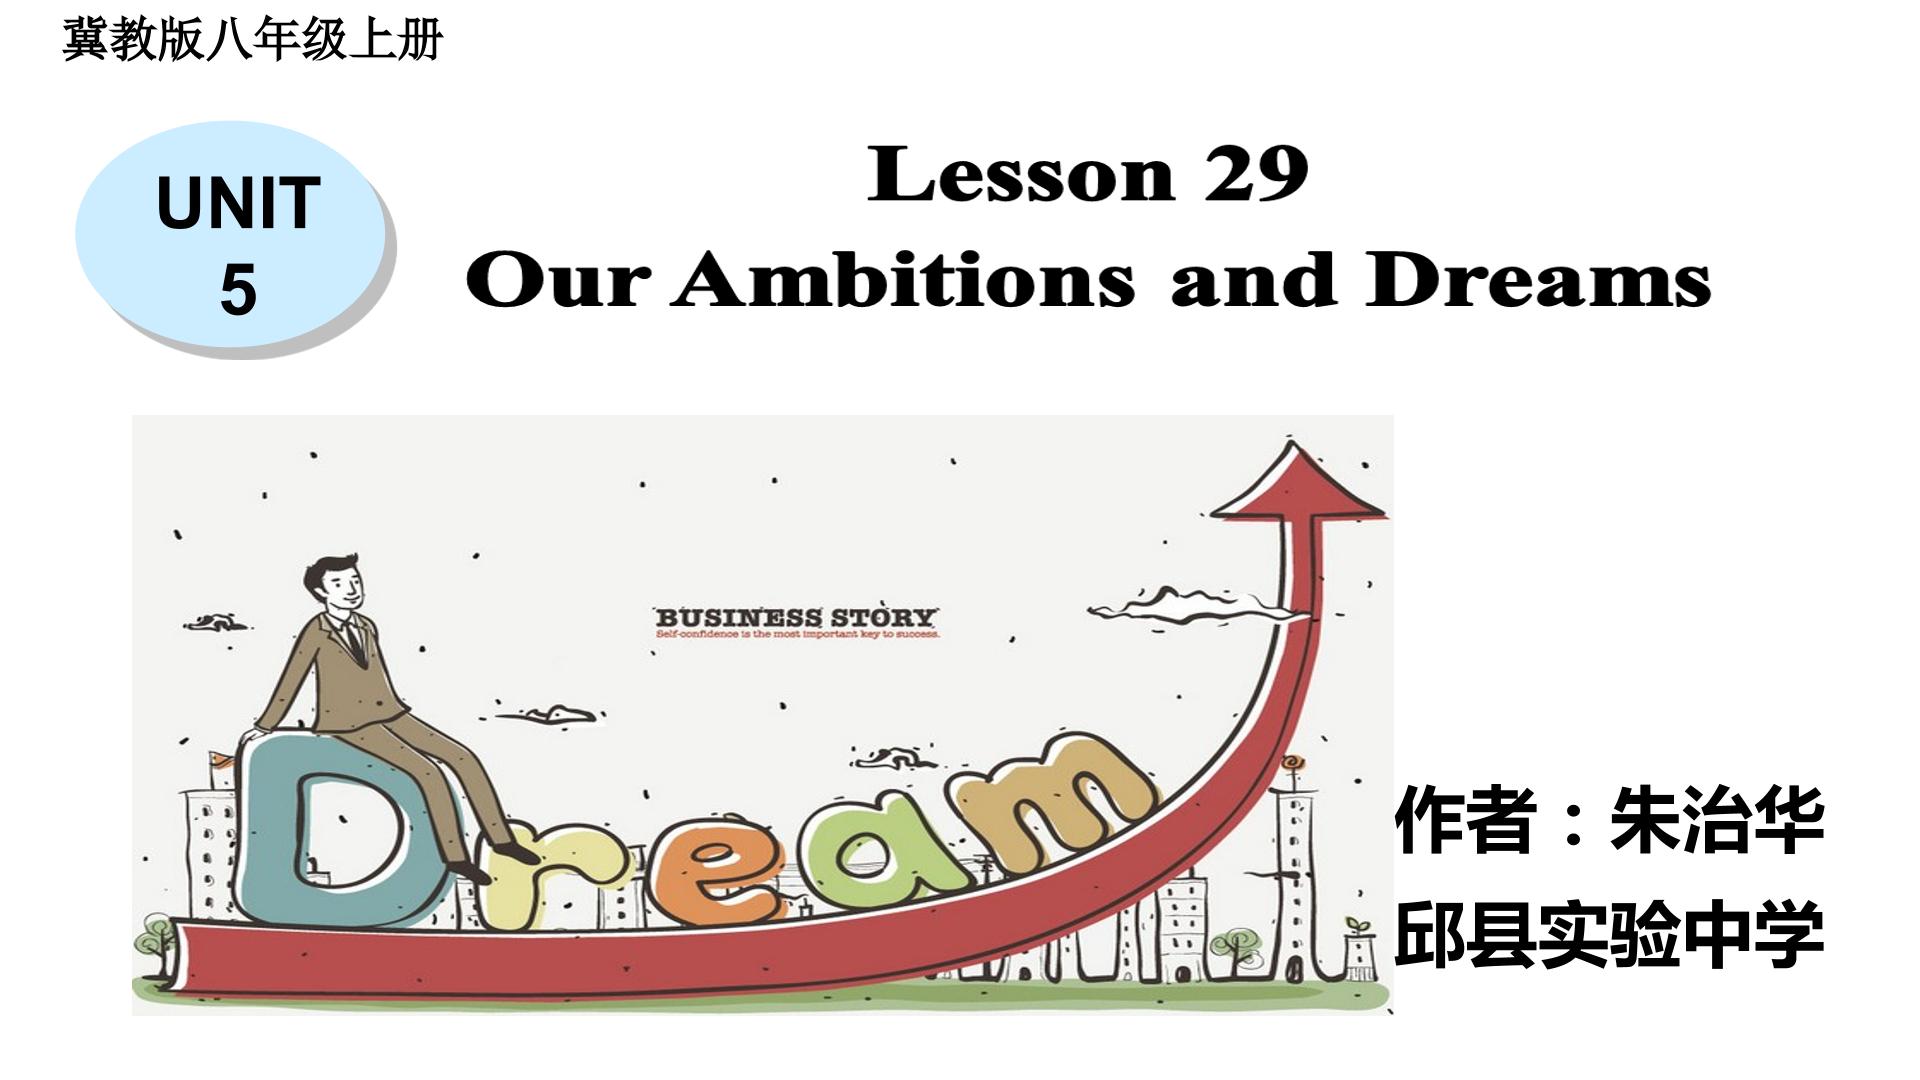 Our Ambitions and Dreams